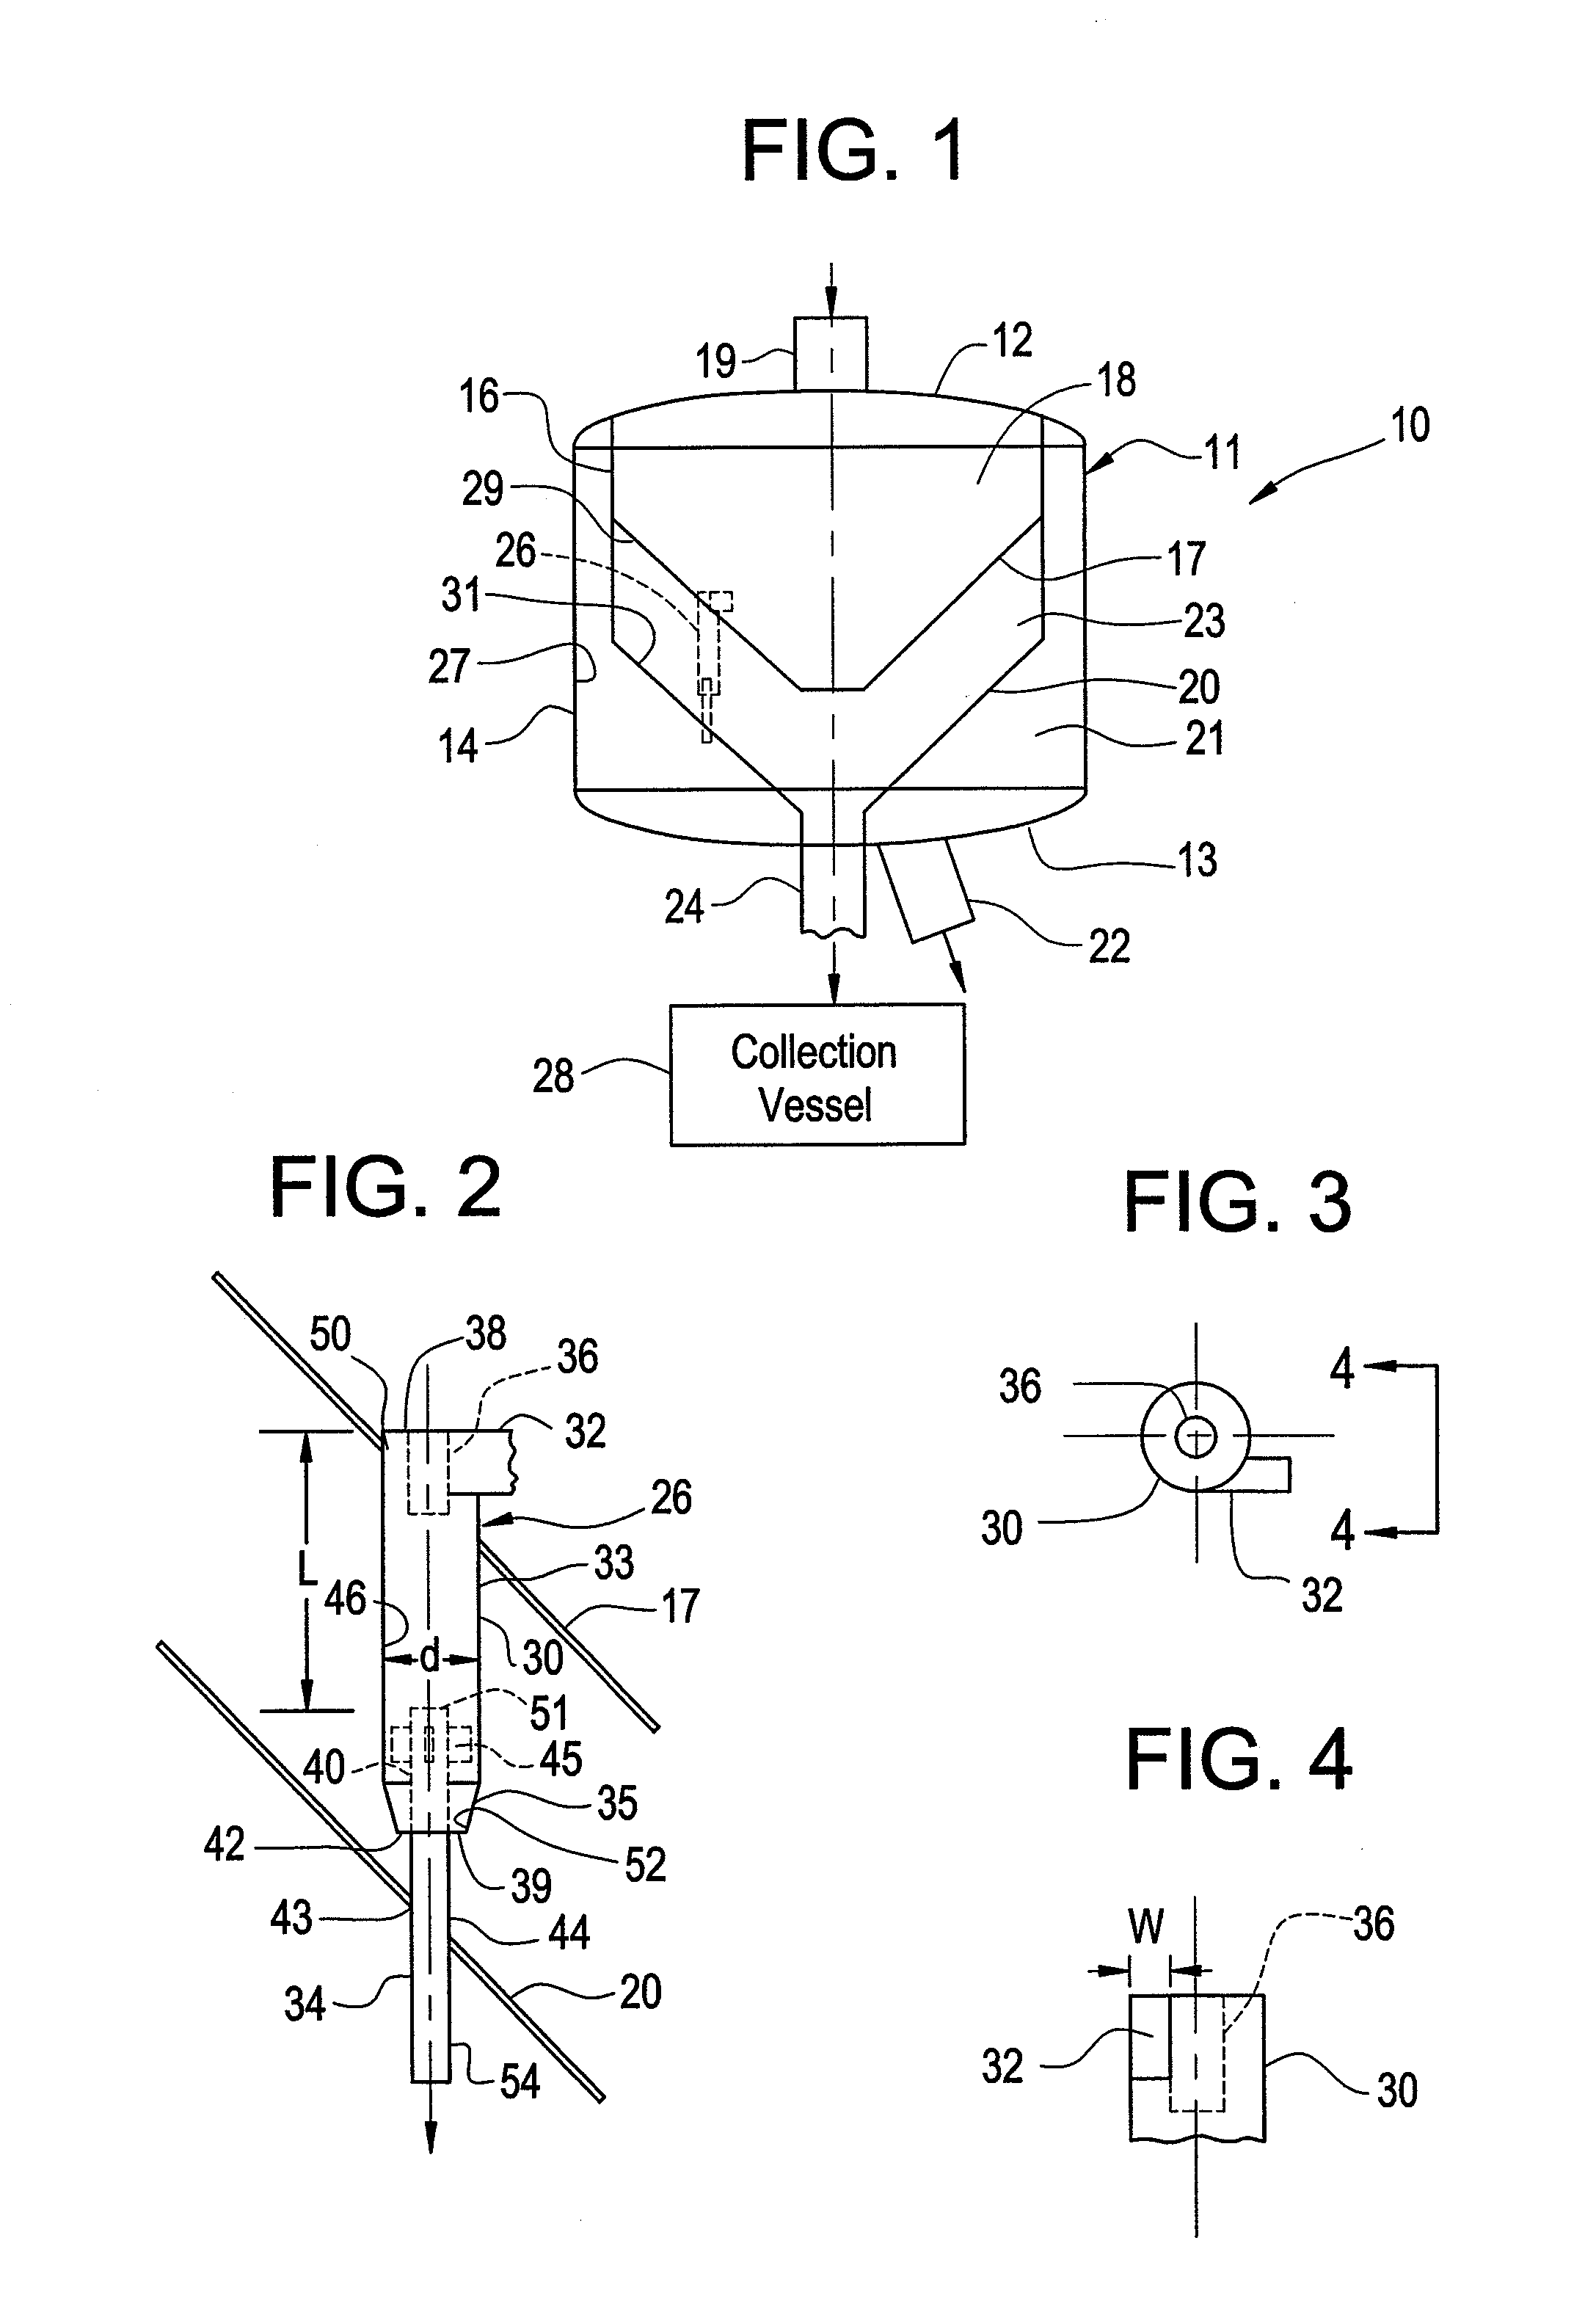 Apparatus and Method for Separating Solids from Gas Streams